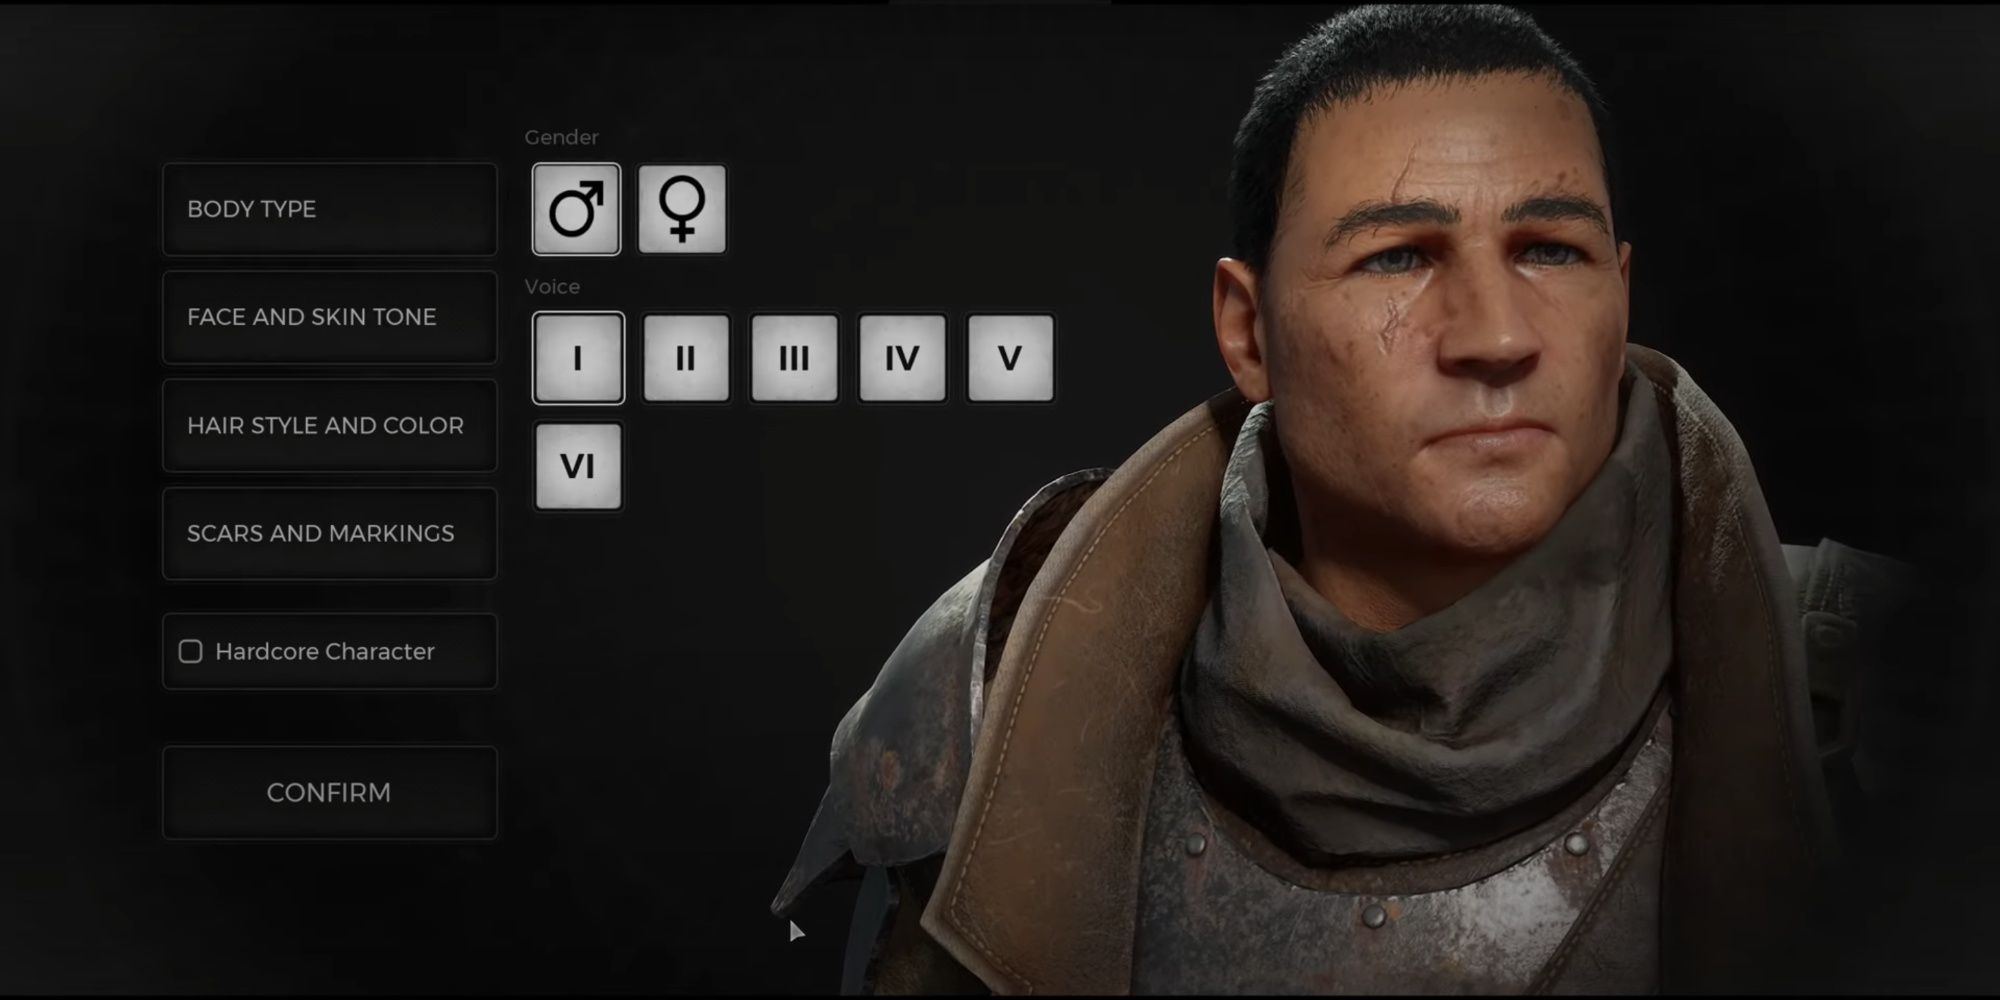 The start of Remnant 2's male character creator, with the gender displayed and options for different voices.